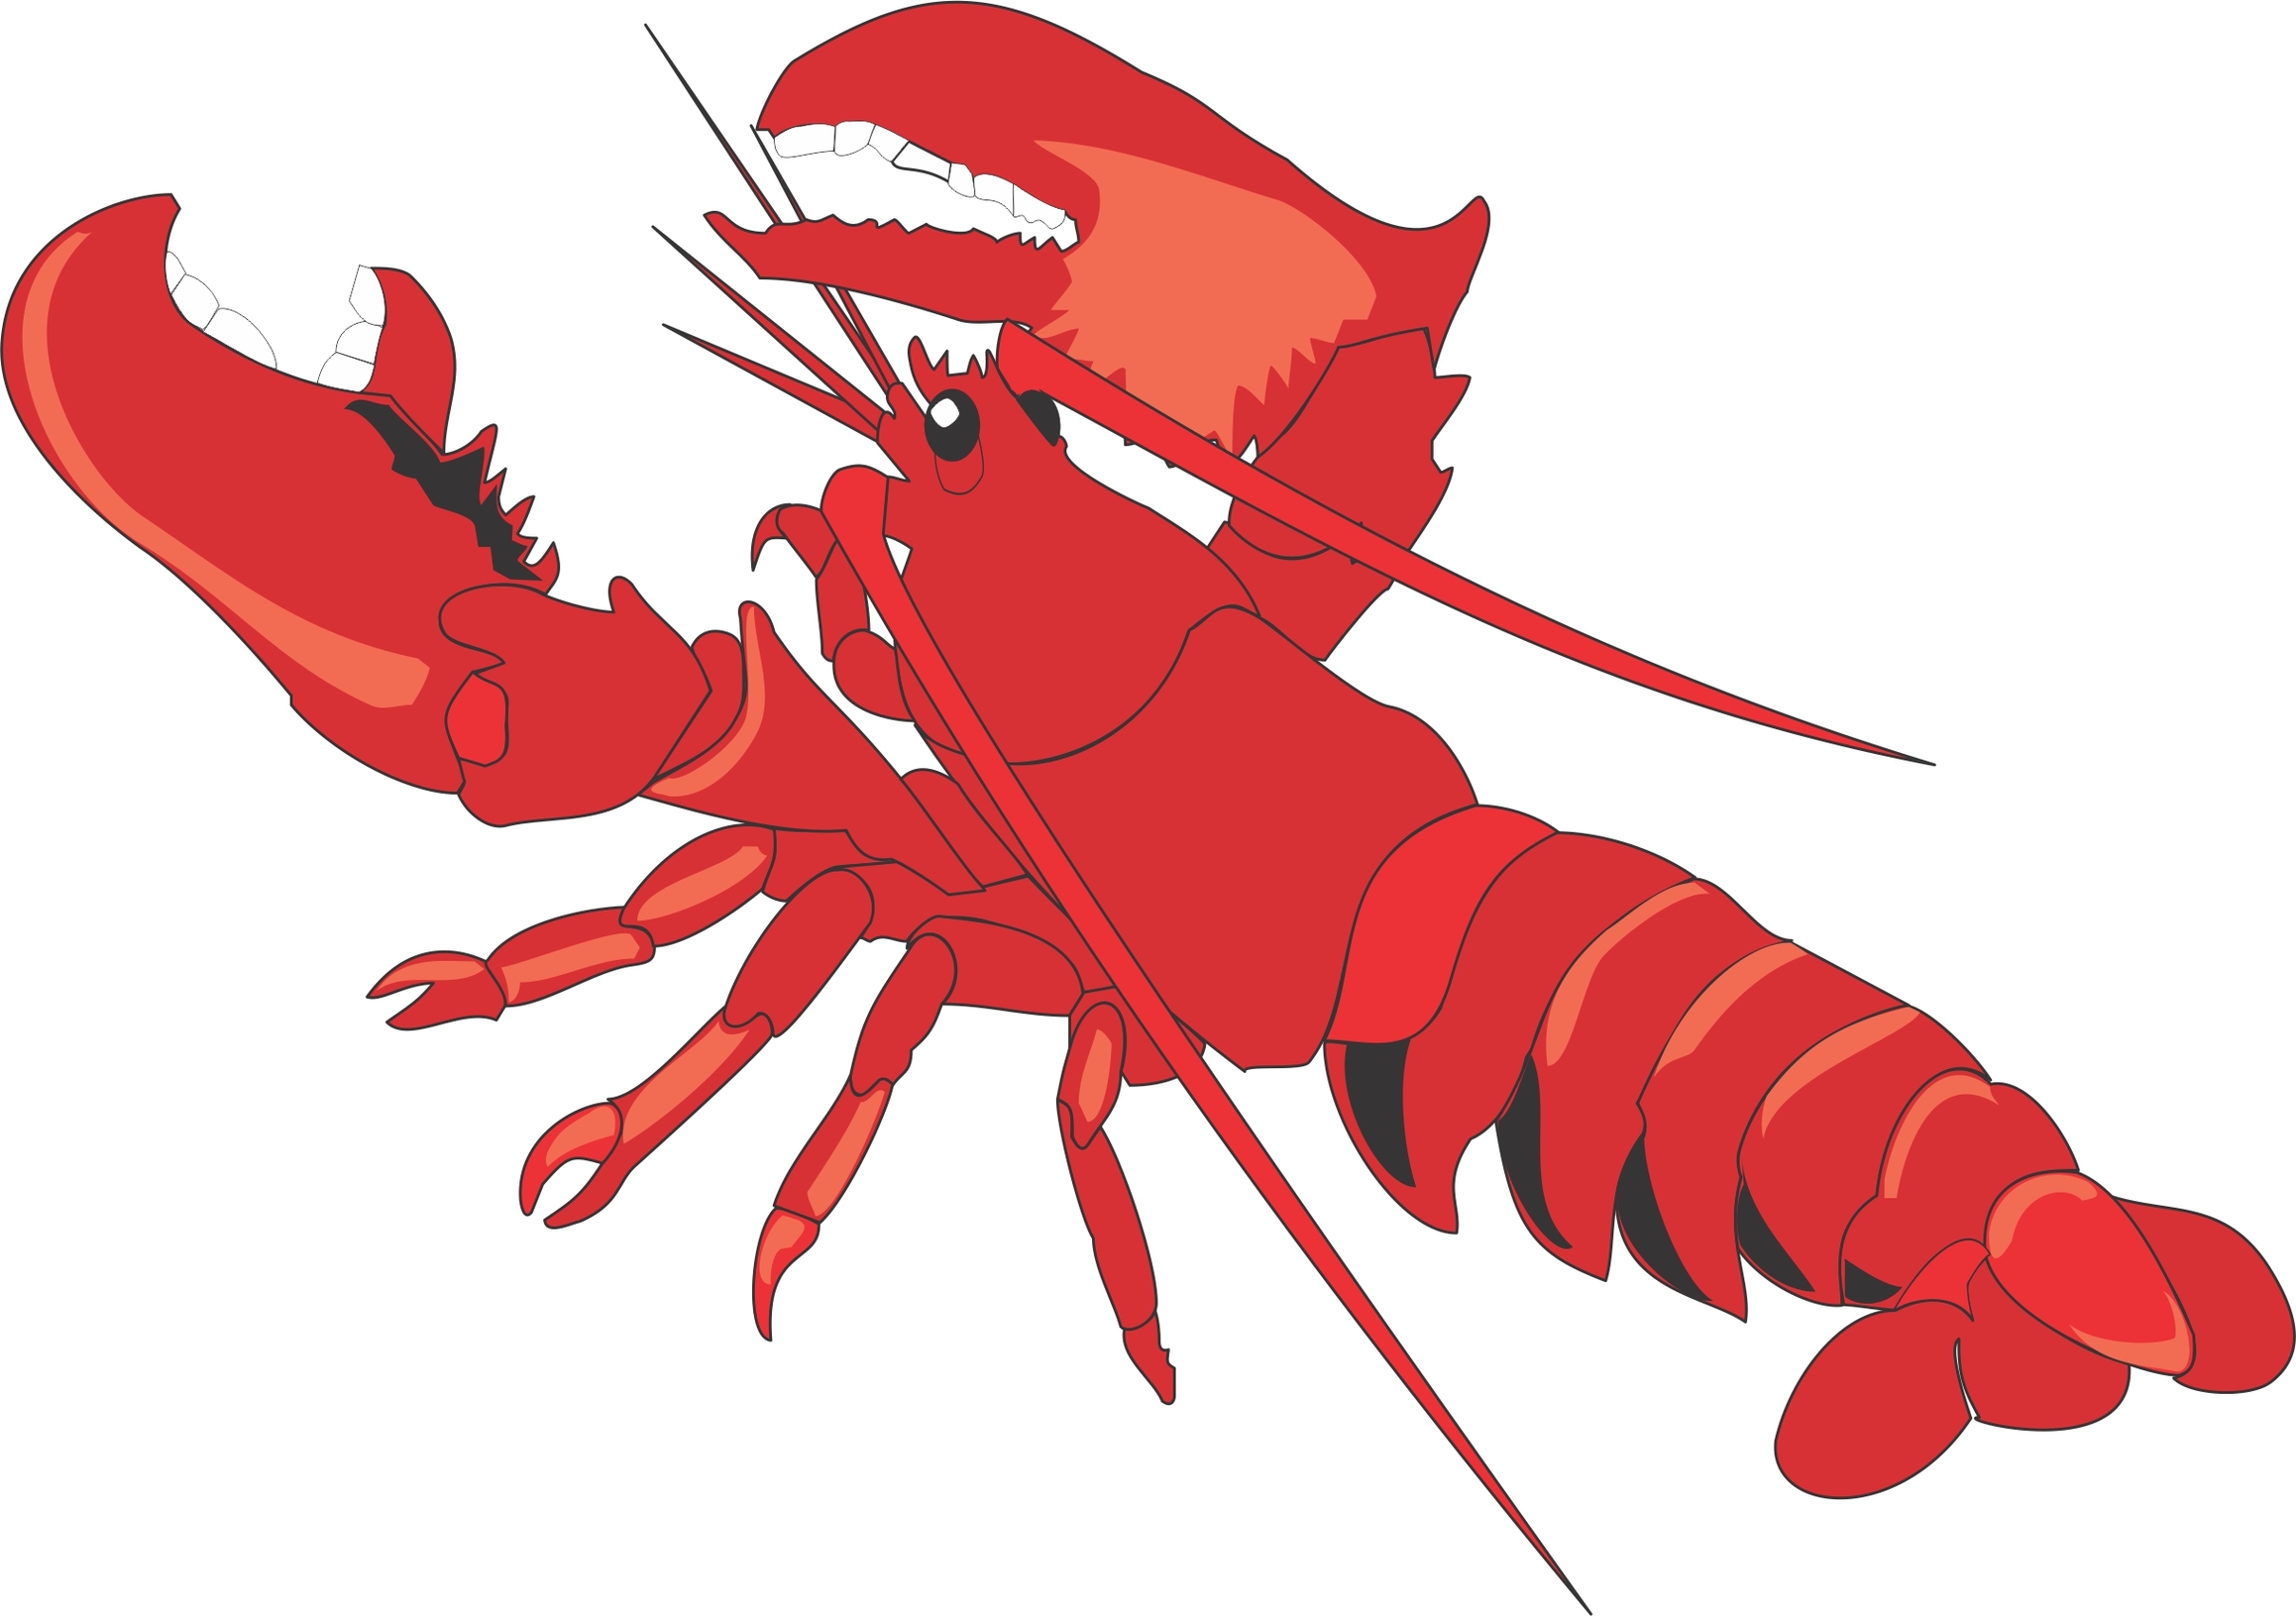 Lobster clip art clipart free to use resource